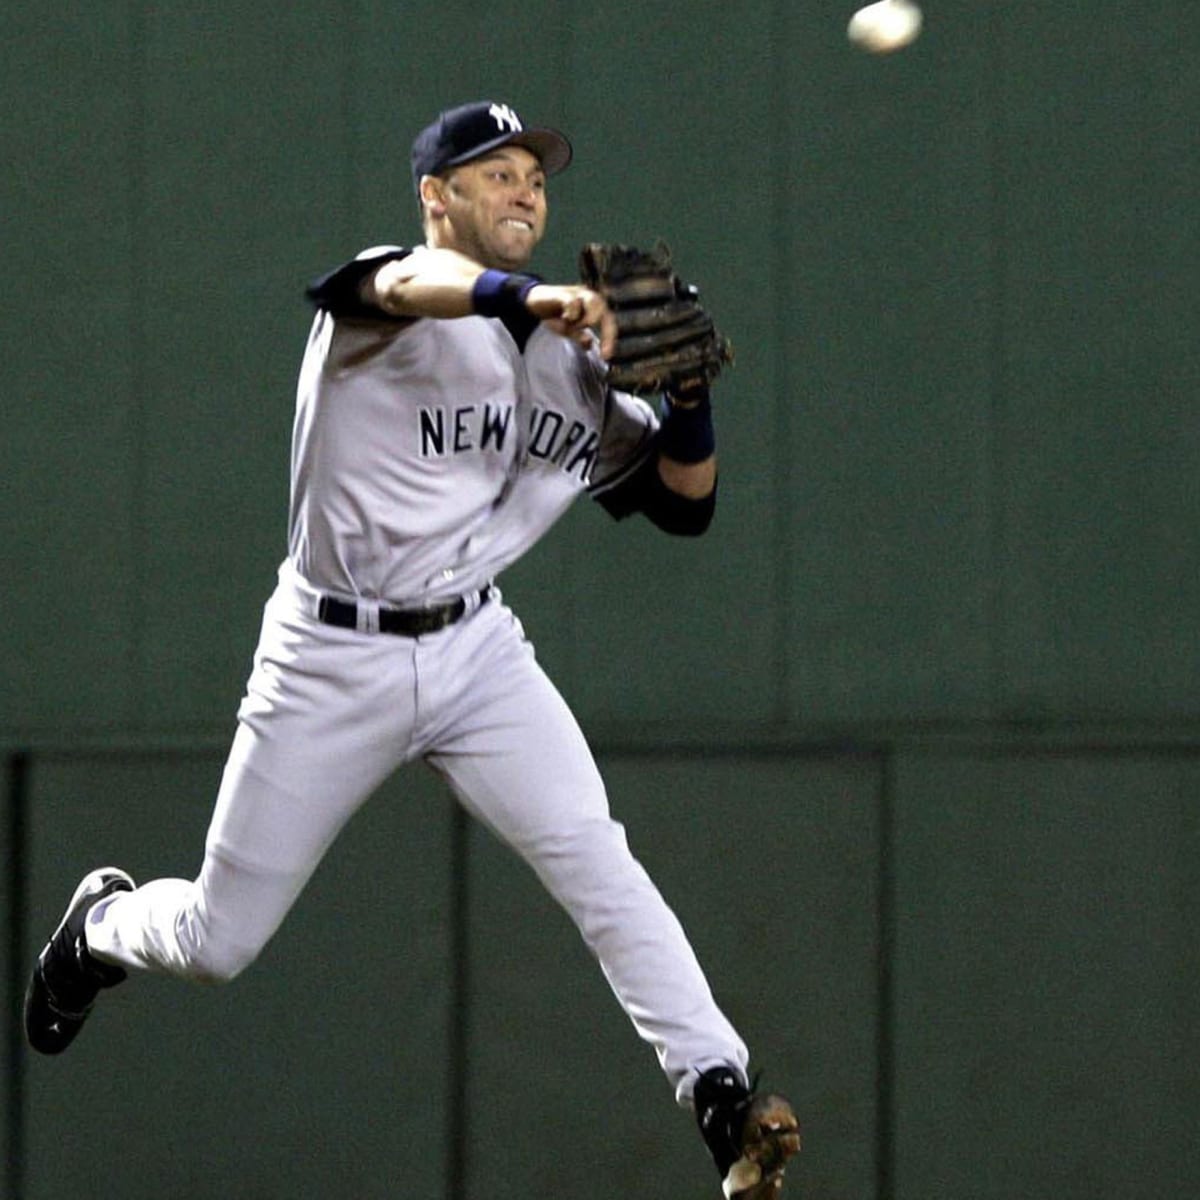 Derek Jeter Hof 2021 there was only one thing in my life I wanted